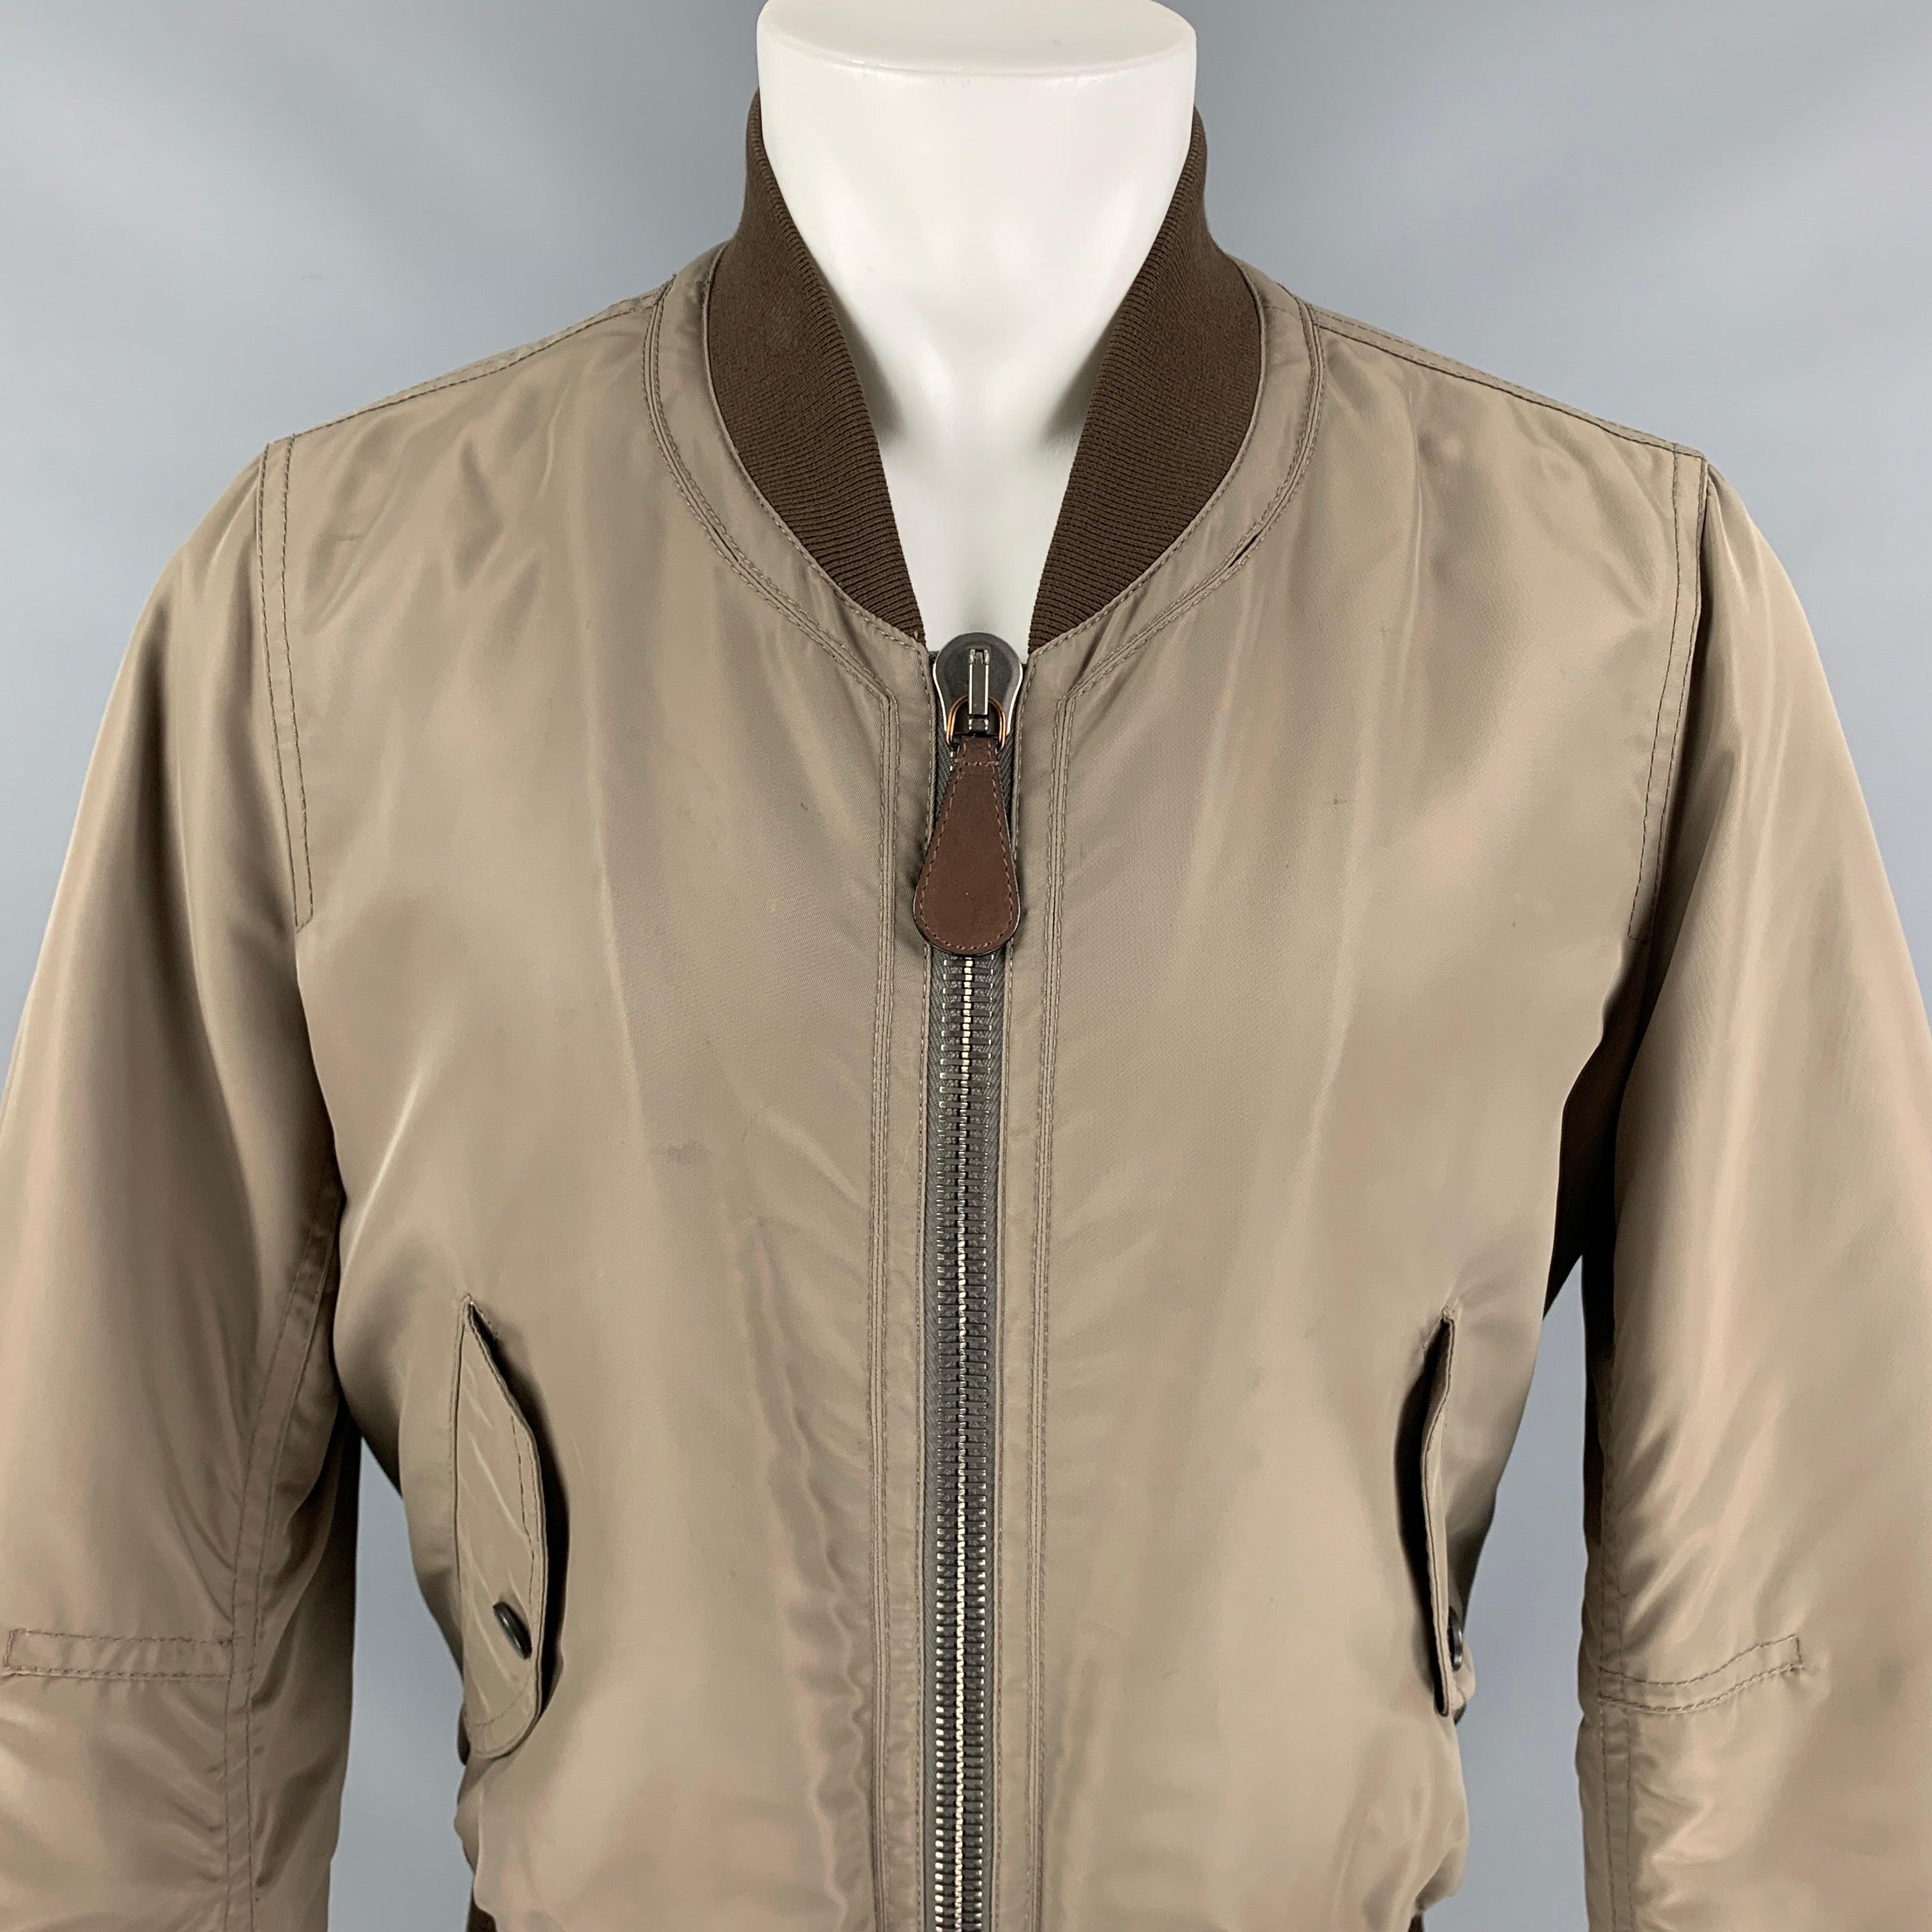 BURBERRY PRORSUM Men's taupe and brown bomber jacket with rib knit collar, dual flap pockets at sides, tonal quilted lining, dual interior seam pockets and zip closure at center front.Good Pre-Owned Condition.  

Marked:   IT 46Shoulder: 17.5 inches